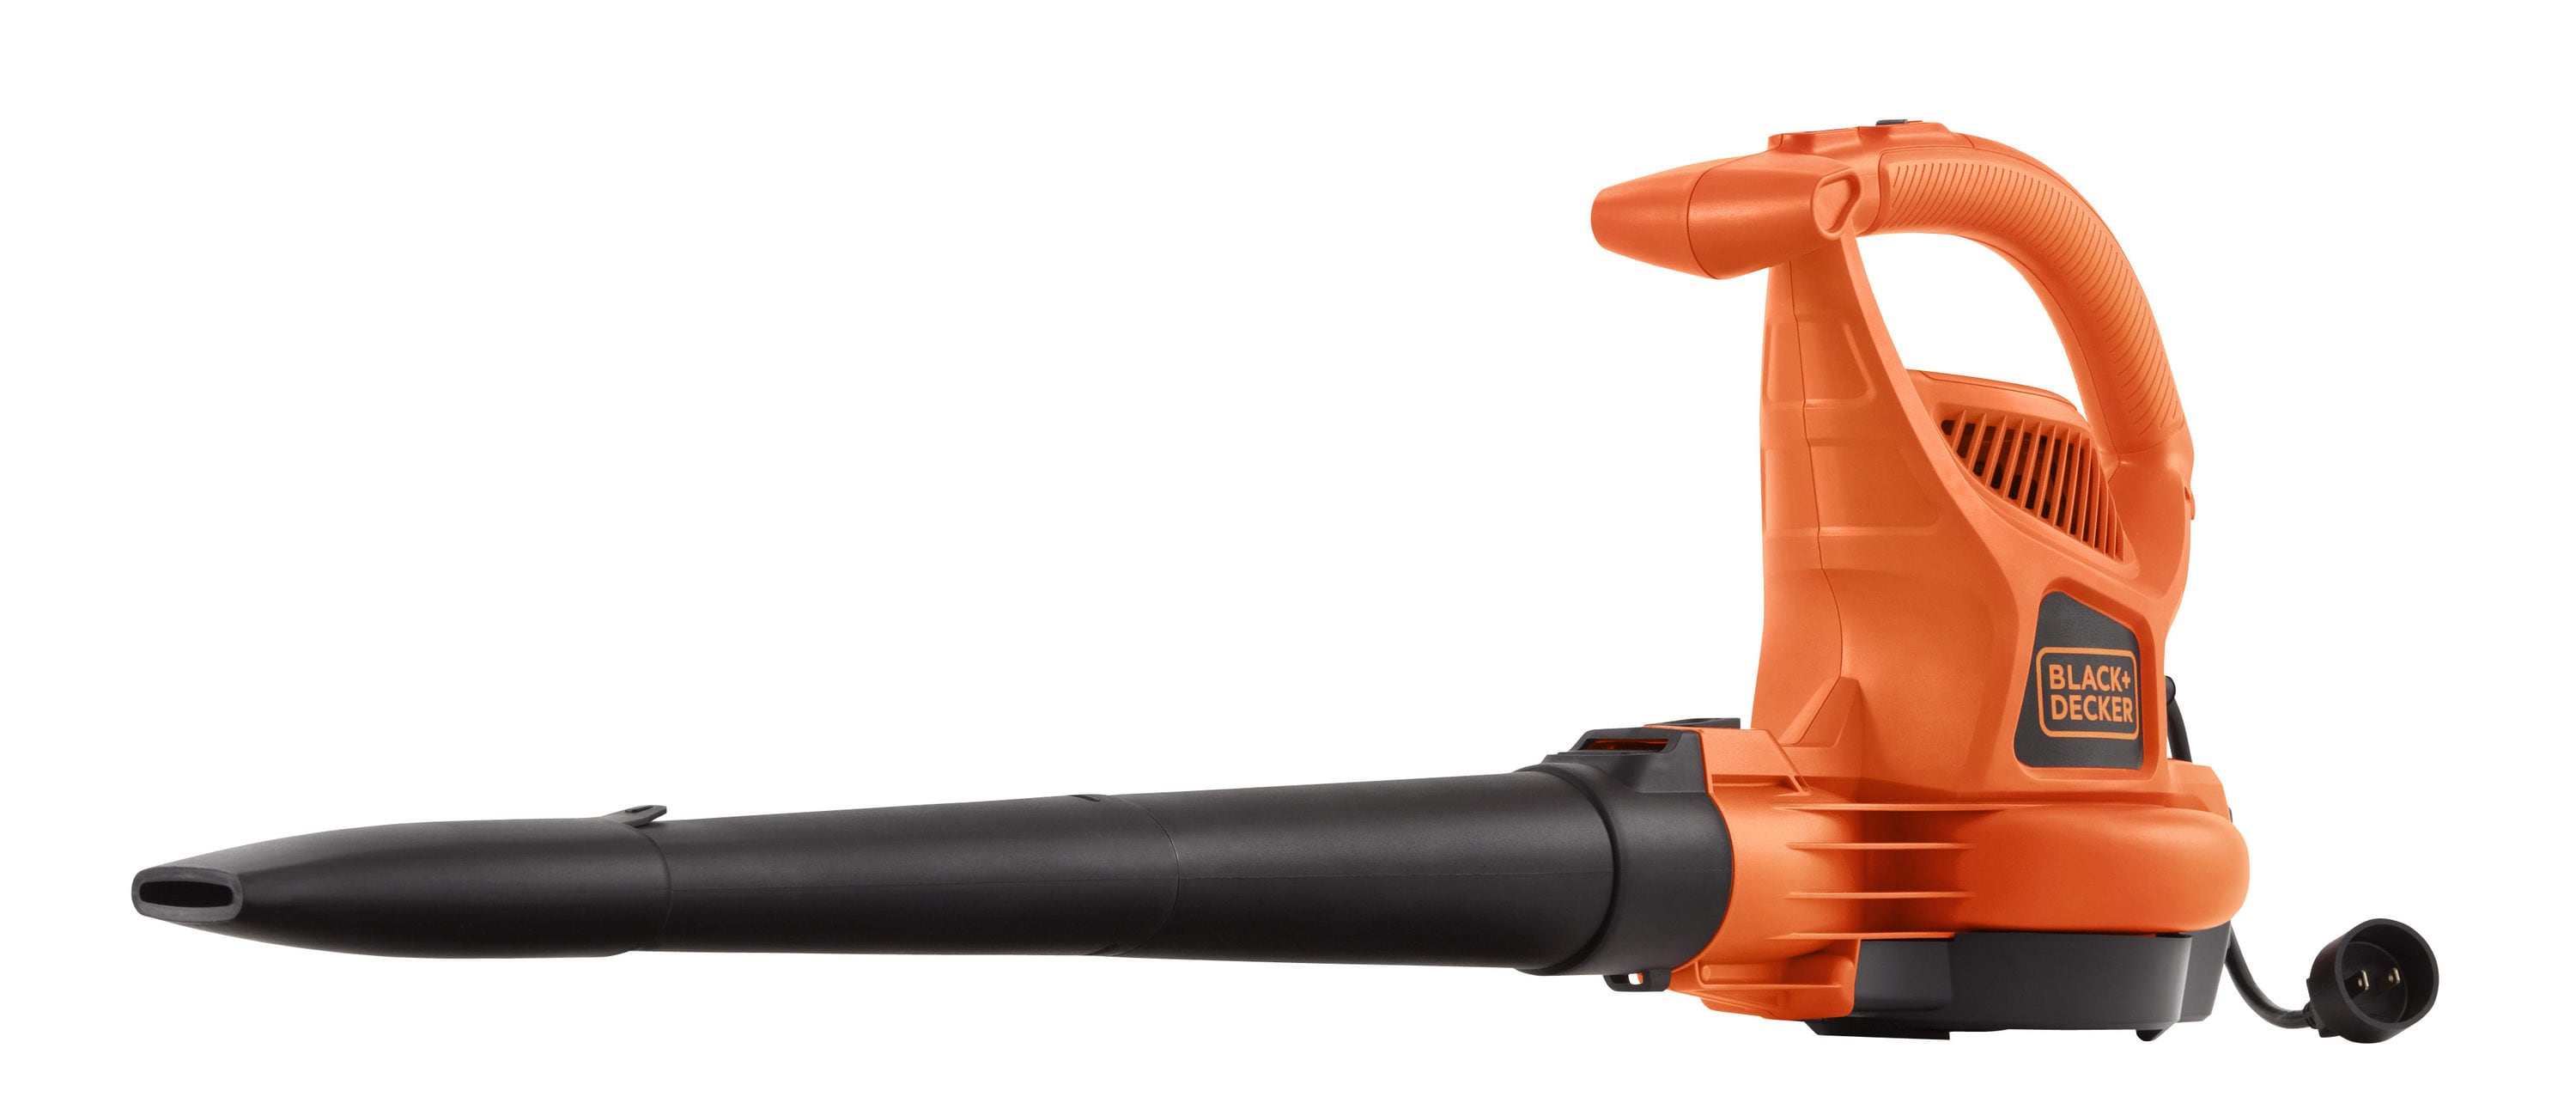 BLACK+DECKER Leaf Blower & Leaf Vacuum, 3-in-1, 12-Amp, 250-MPH, 400-CFM ( BV6000),  price tracker / tracking,  price history charts,   price watches,  price drop alerts